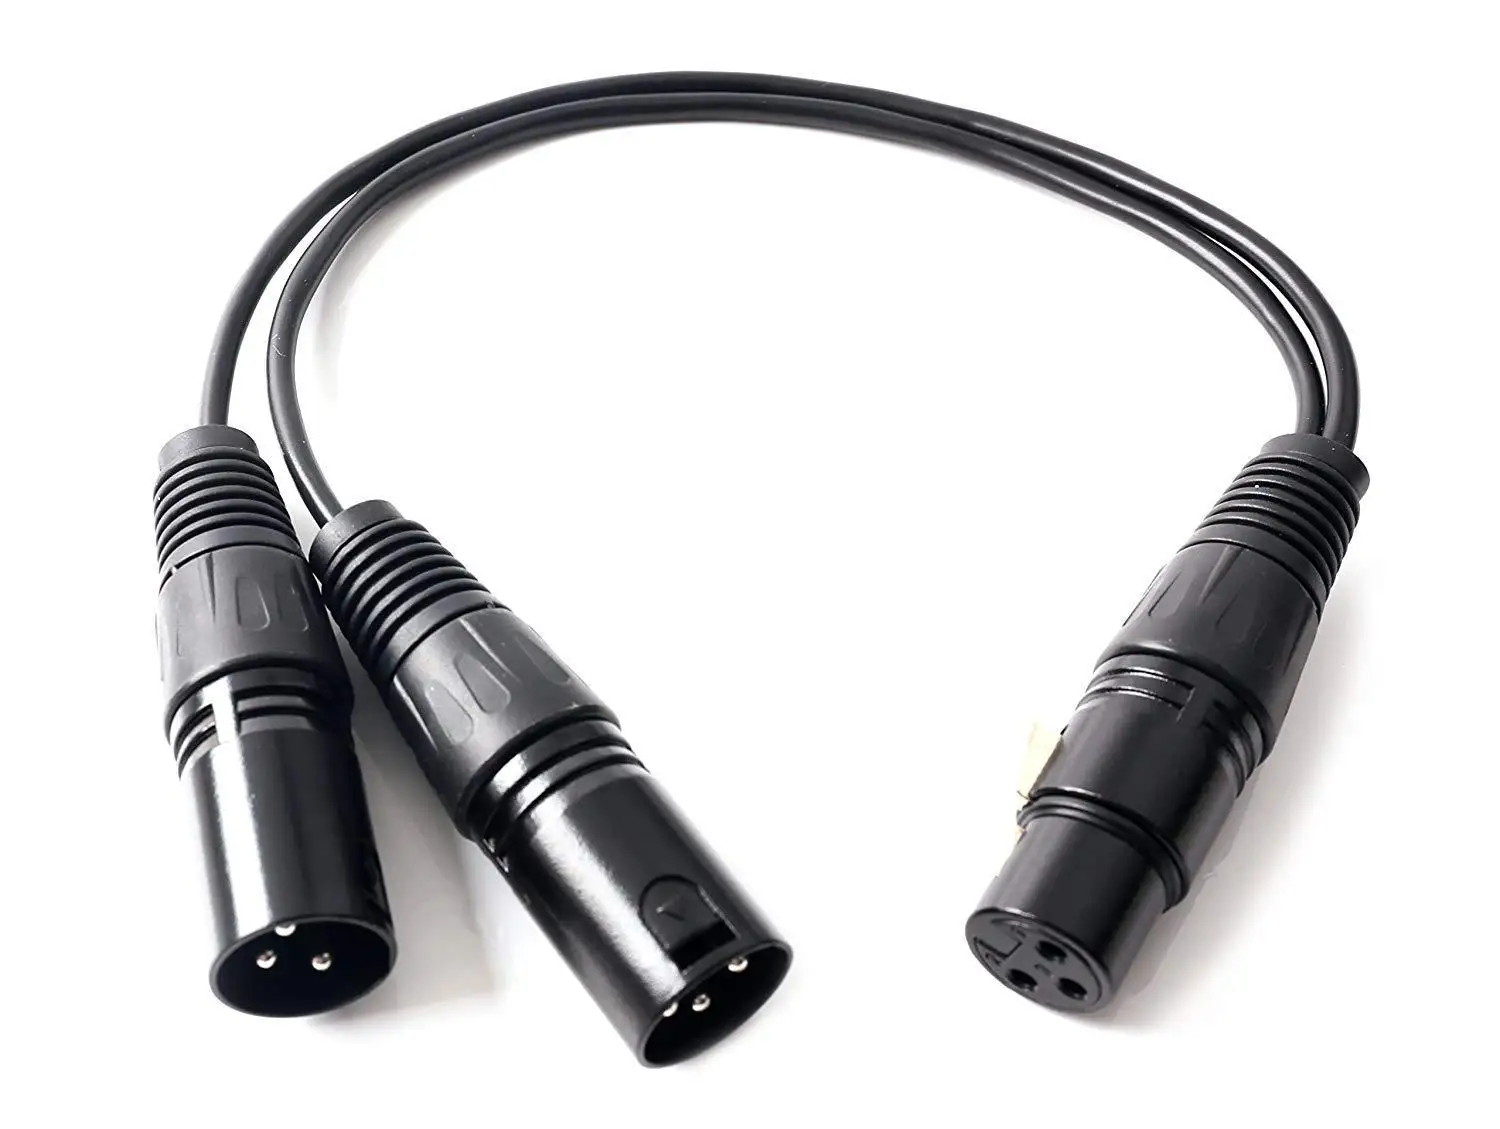 Computer Cables 1Ft 3Pin XLR Female Jack to 2 Male XLR Plug Y Splitter Adapter Cord MIC Microphone Audio Extension Adaptor Cable Wire Line Cable Length Black